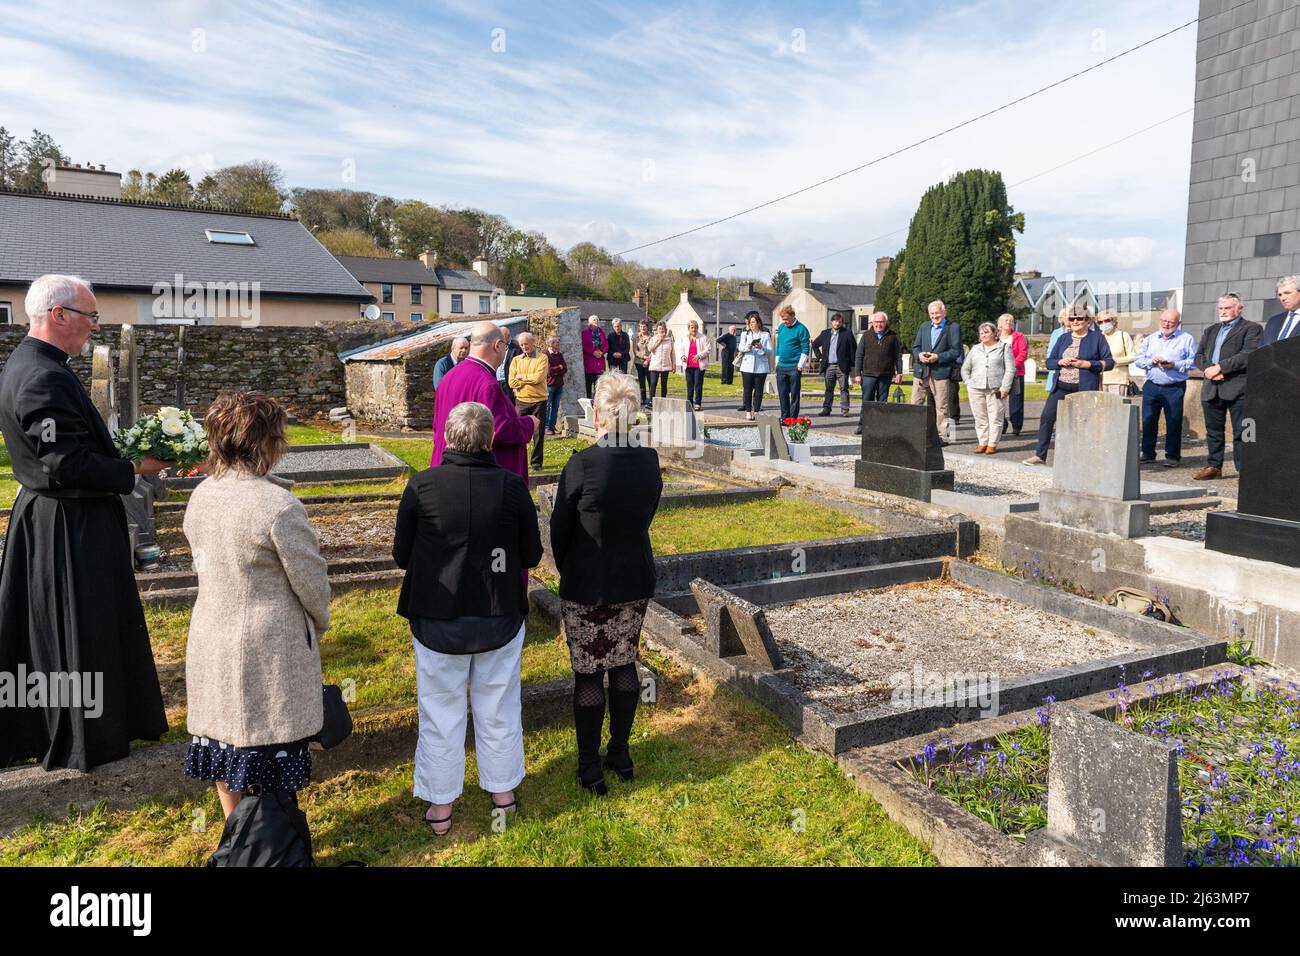 Dunmanway, West Cork, Ireland. 27th Apr, 2022. Today is the 100th Anniversary of the Bandon Valley killings, where 3 men from Dunmanway were shot dead. Bishop of Cork, Cloyne and Ross, Dr. Paul Colton, speaks before laying a wreath on the grave of 37 year old victim David Gray. Credit: AG News/Alamy Live News Stock Photo